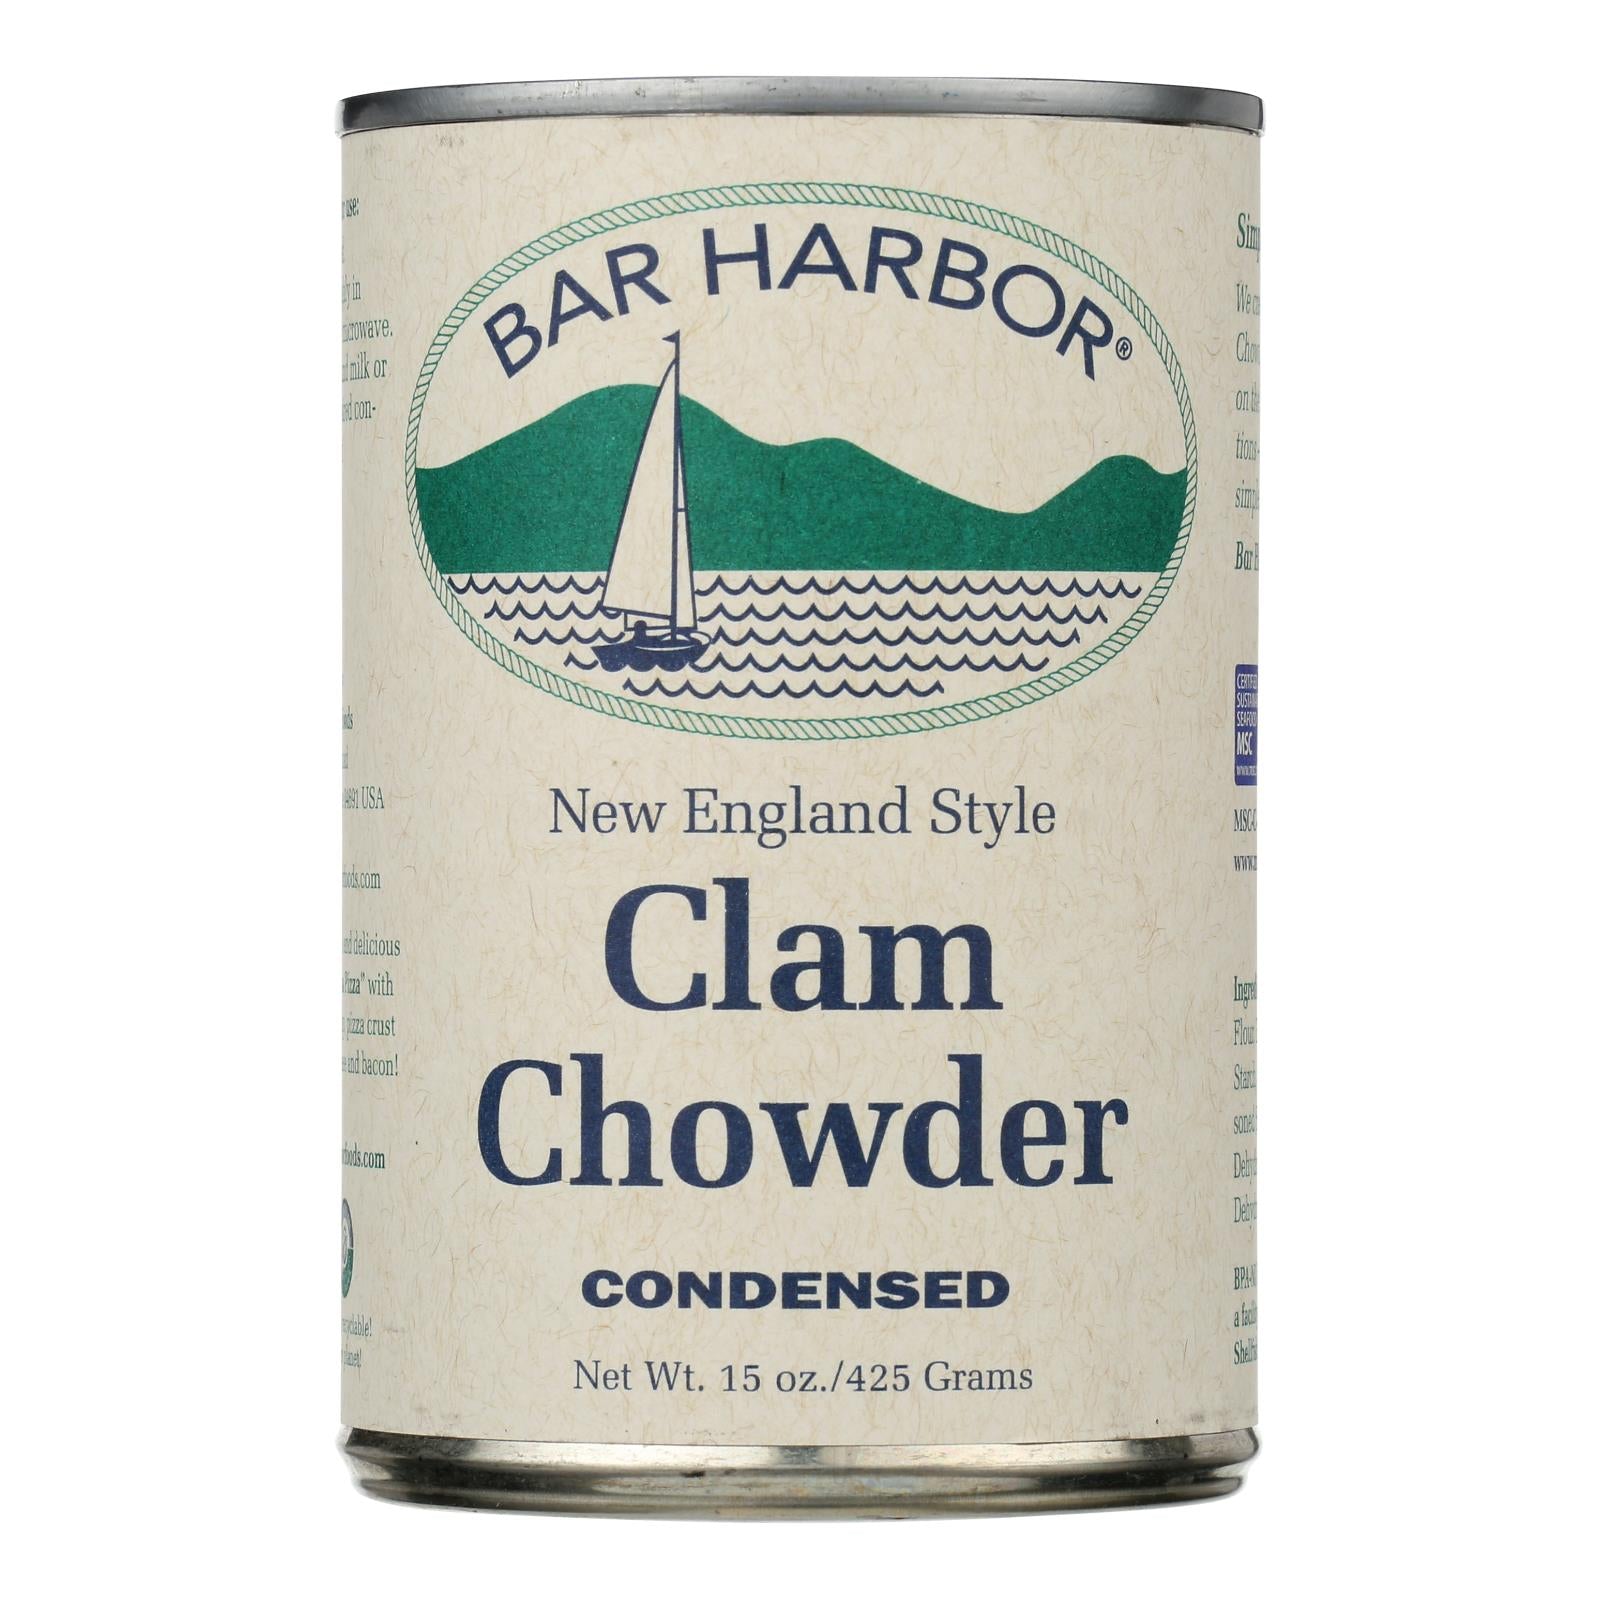 Bar Harbor - All Natural New England Clam Chowder - Case Of 6 - 15 Oz.